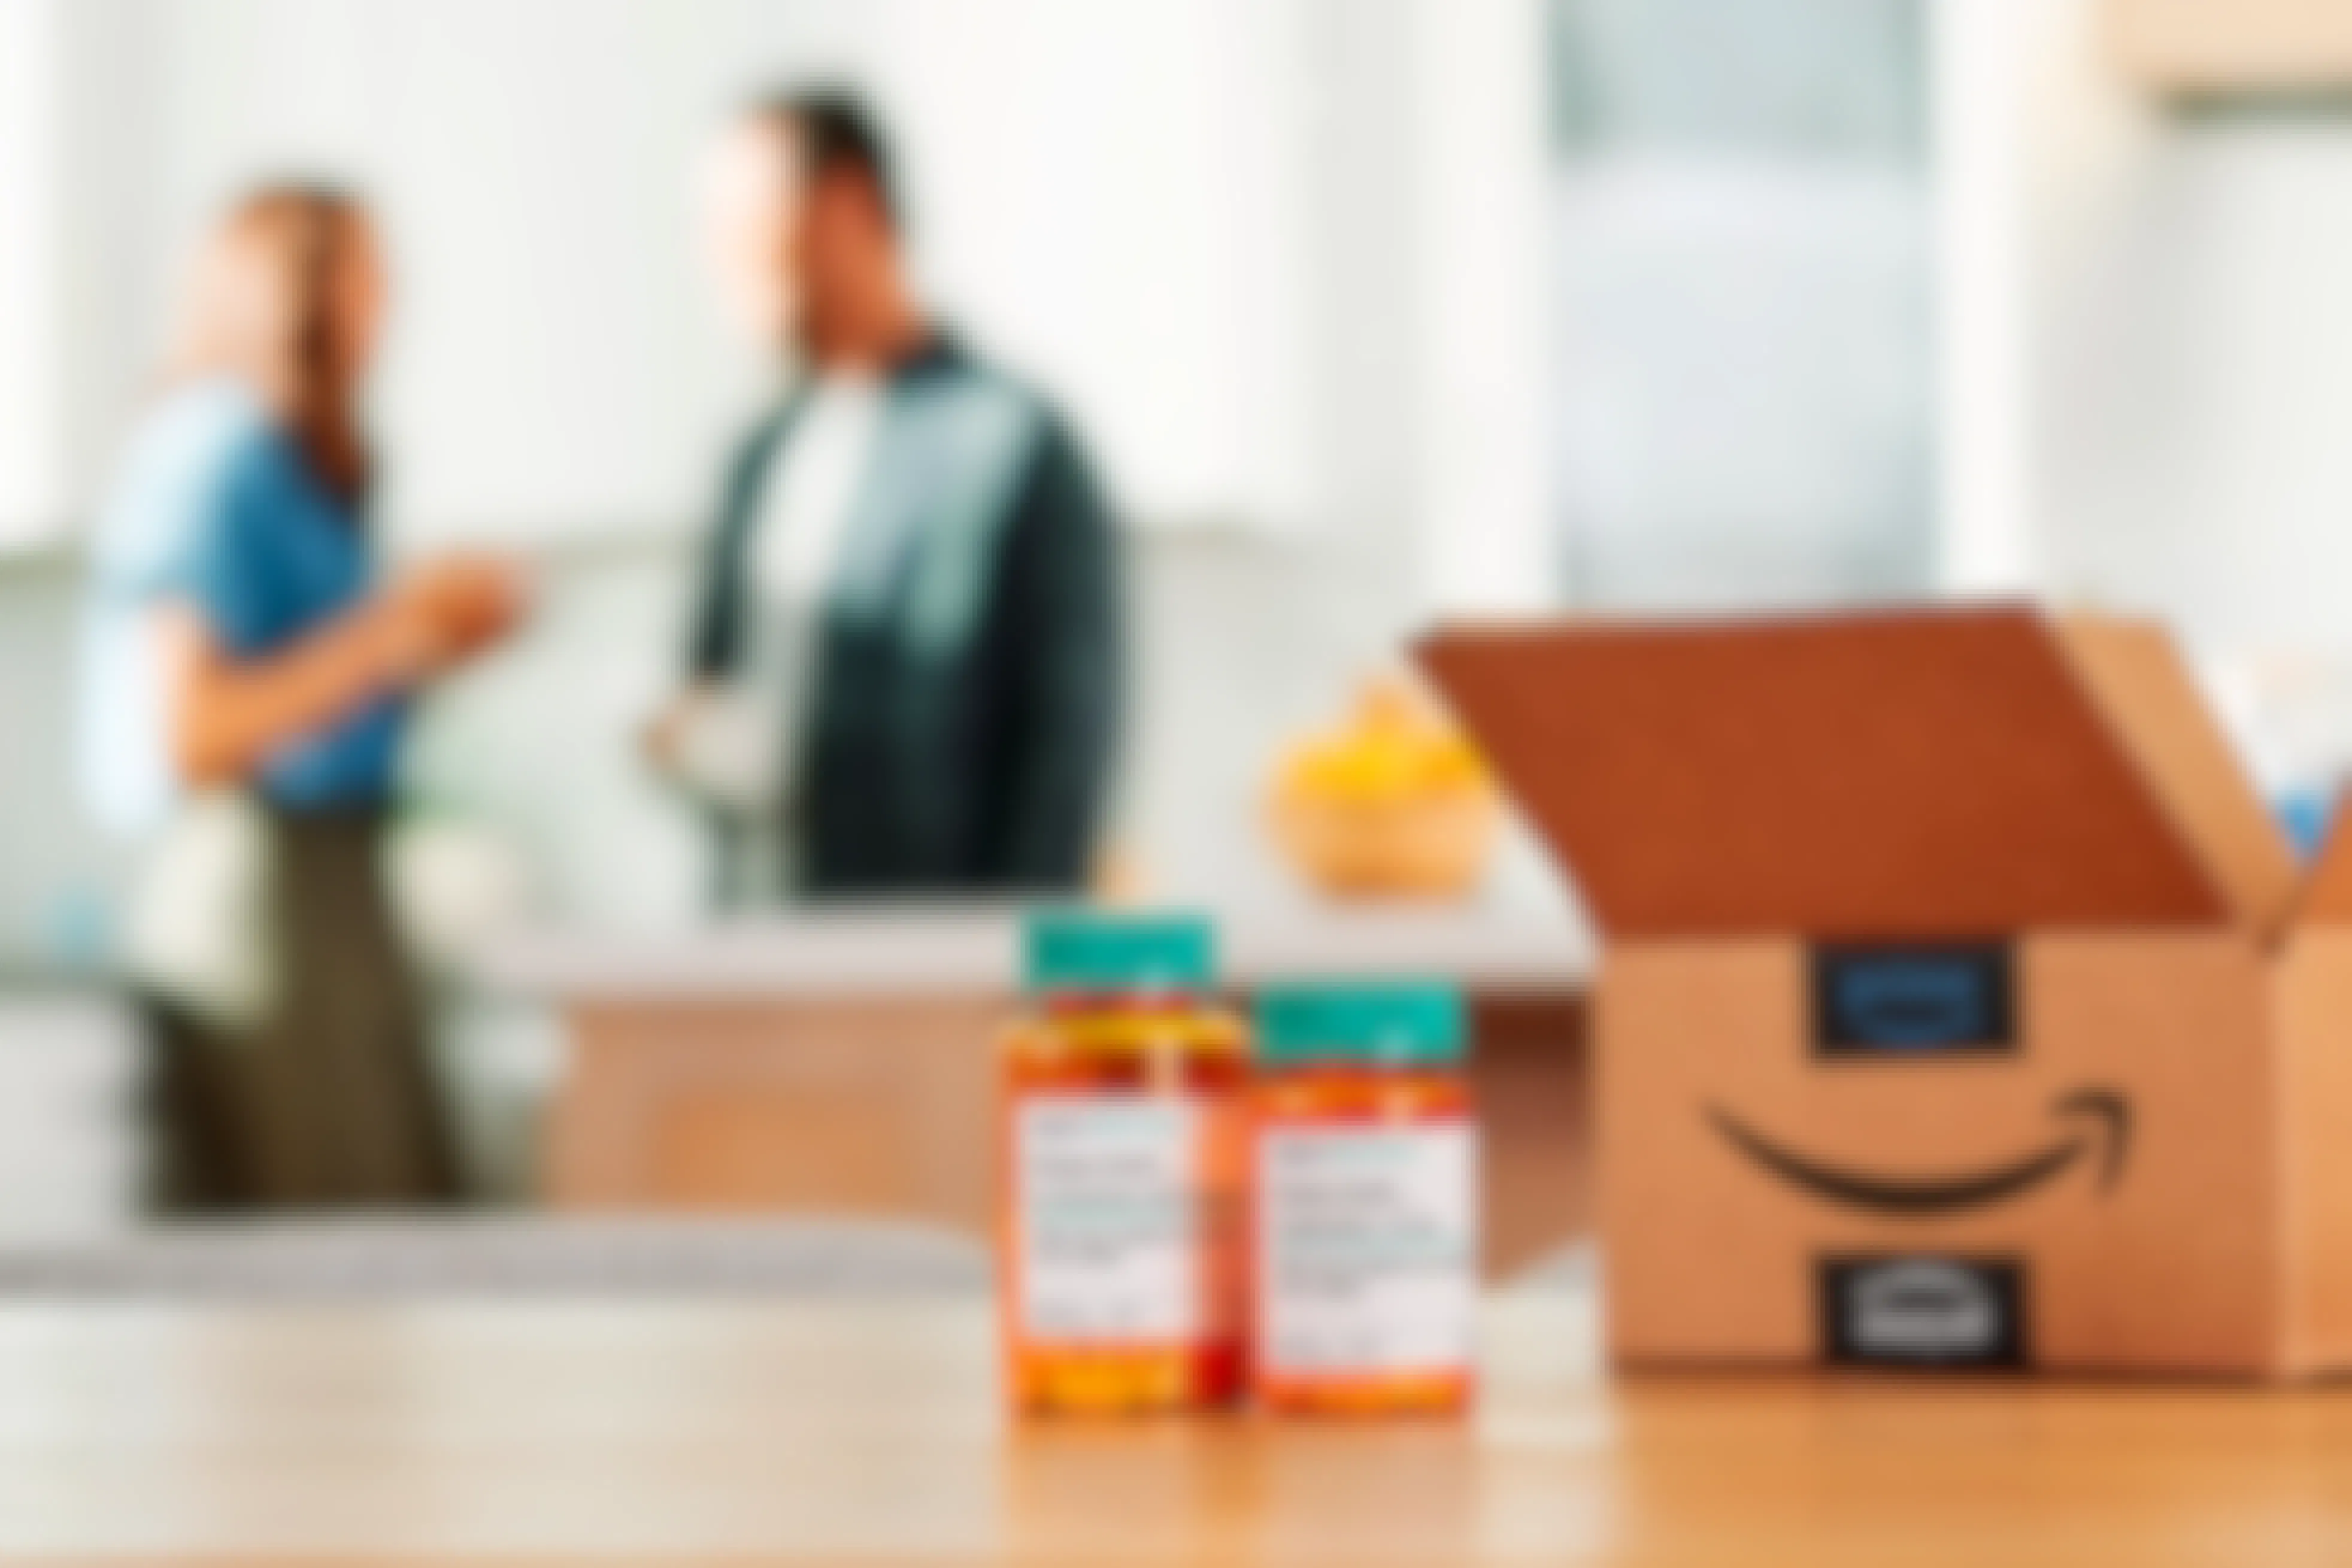 Amazon Launches Monthly RxPass for $5 Prescriptions